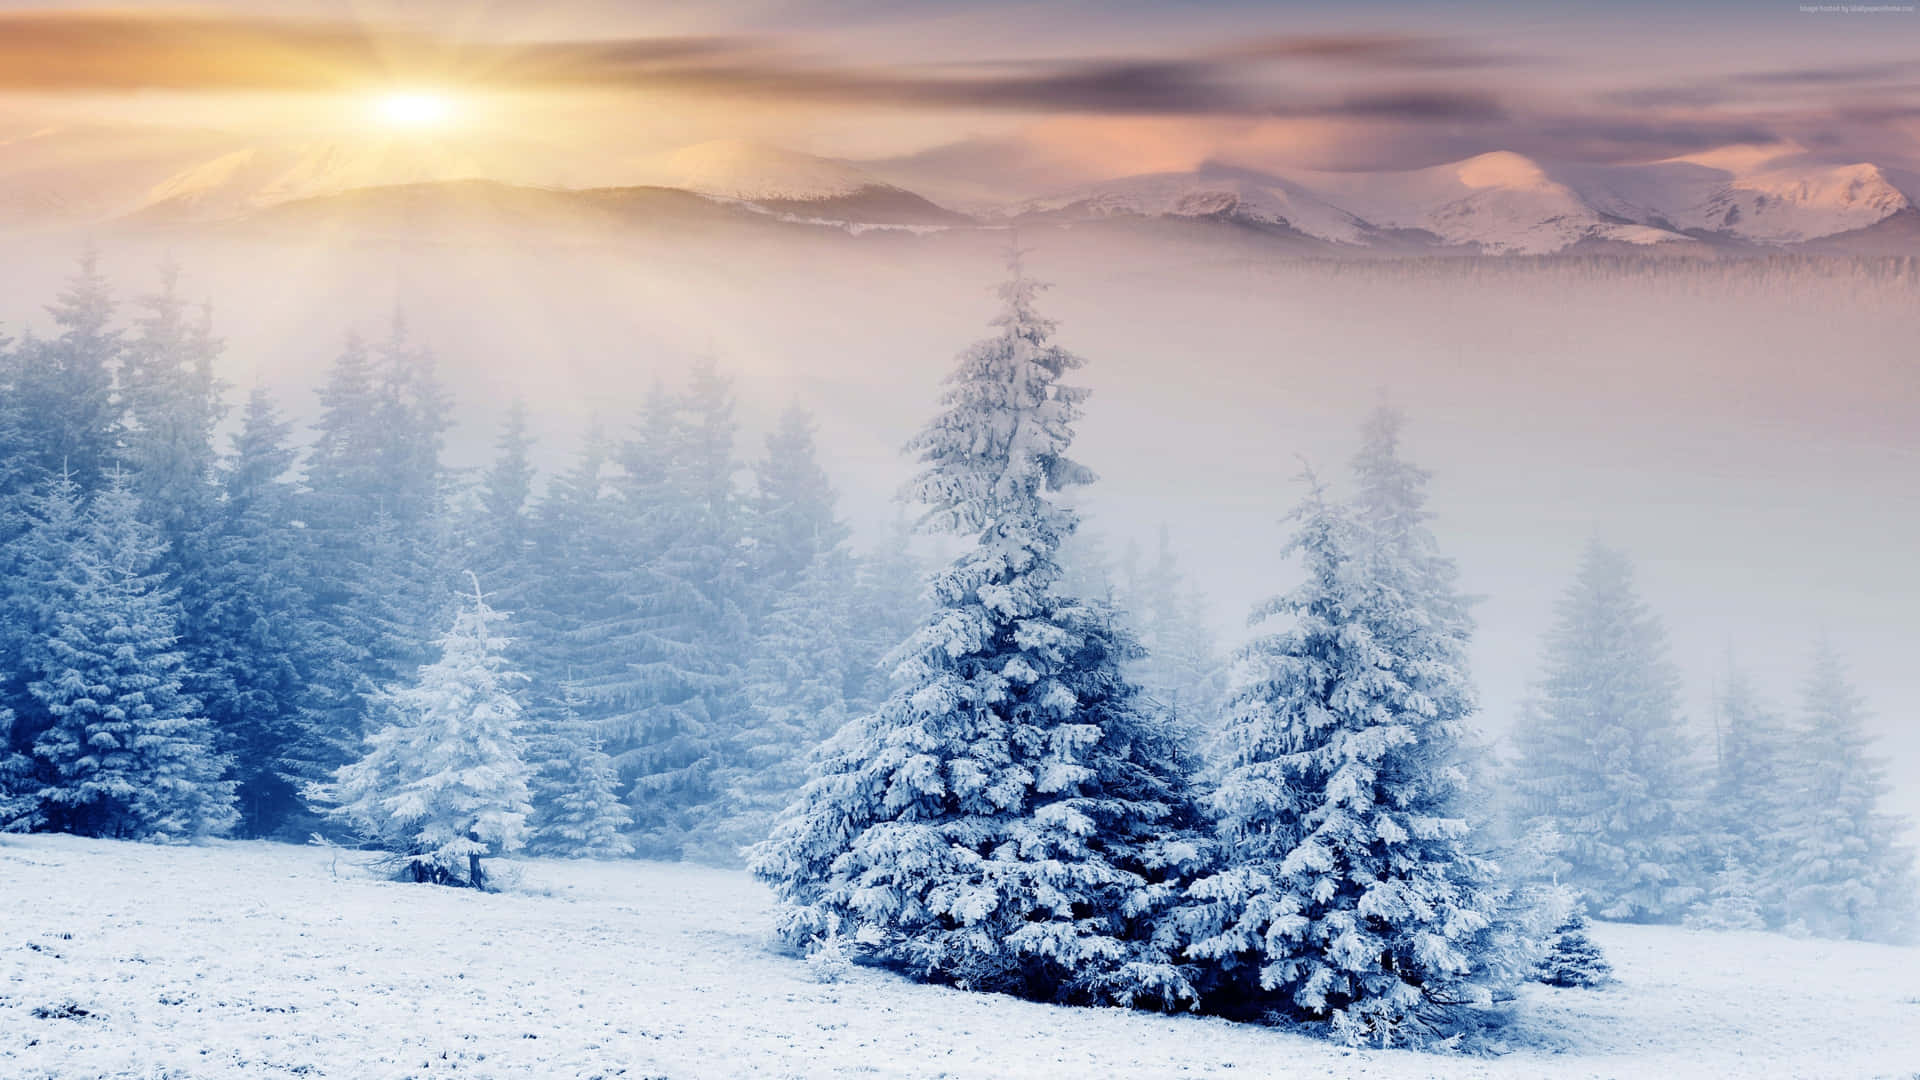 Enjoying a peaceful moment surrounded by nature while a beautiful winter sunset descends. Wallpaper